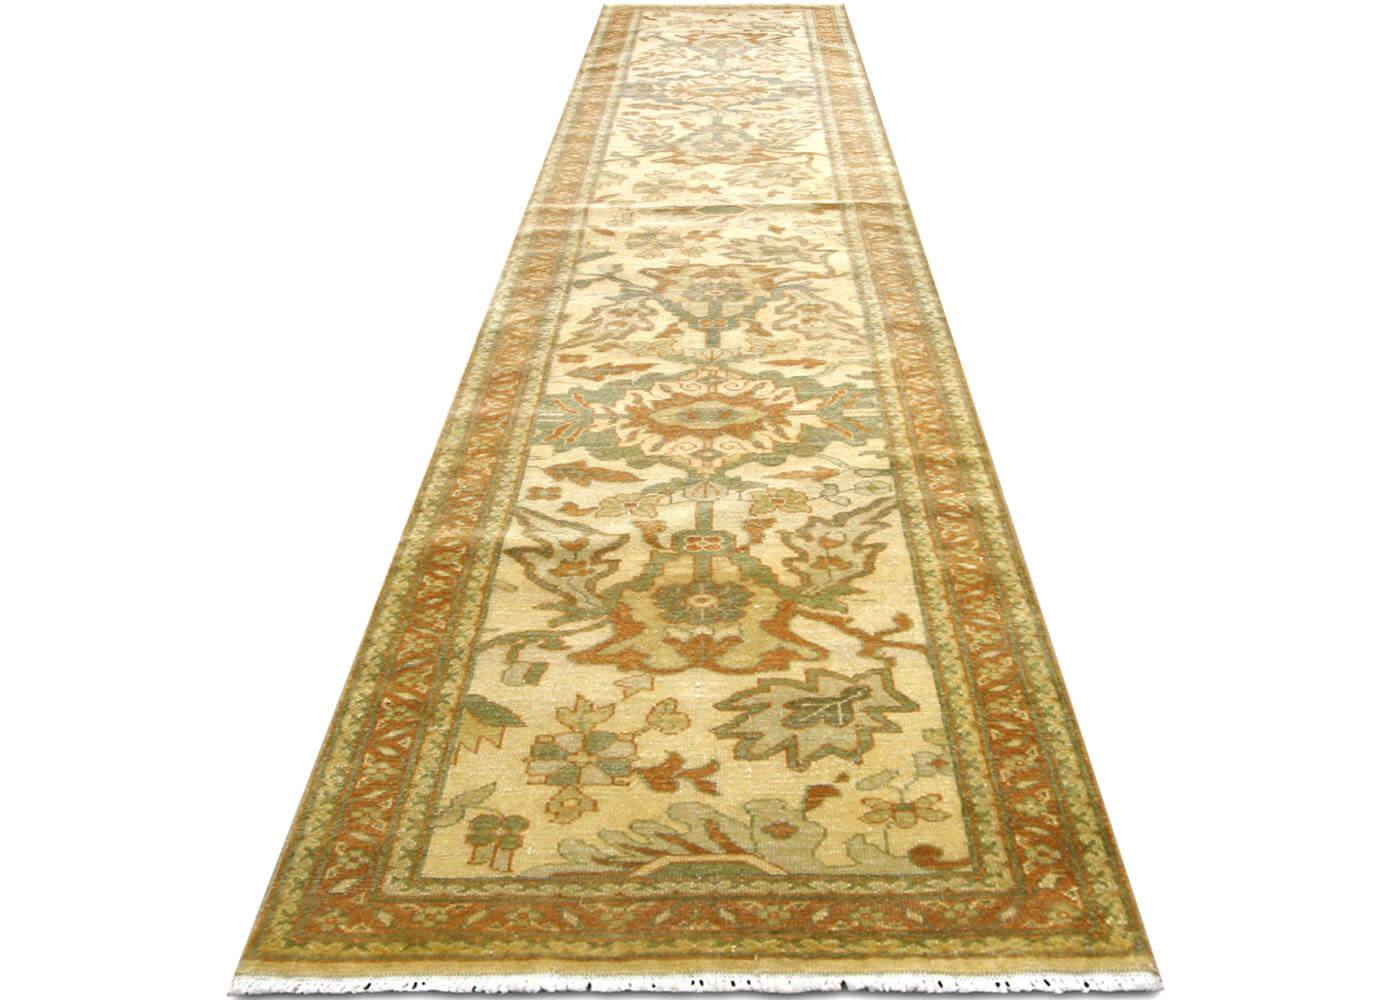 Vintage Egyptian Sultanabad Runner - 2'10" x 13'8"